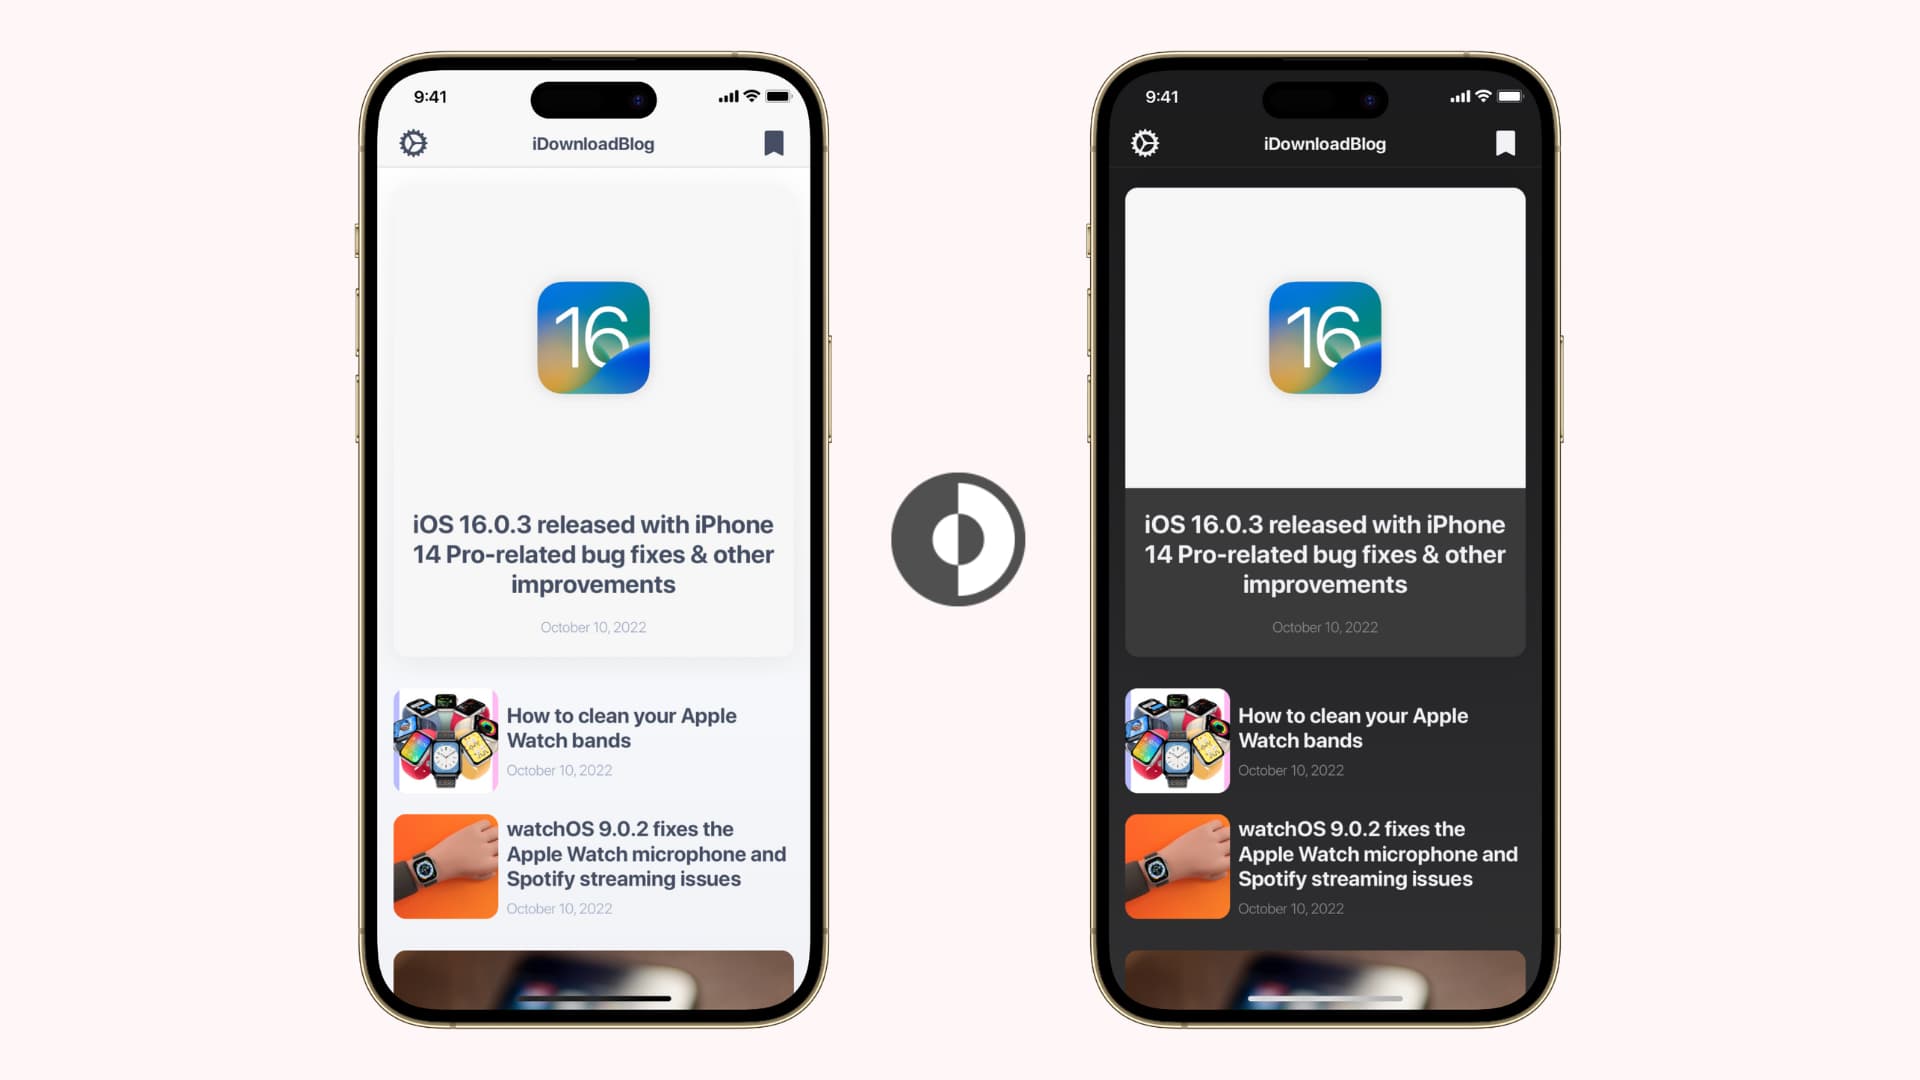 Two iPhone mockups, with one showing an app in Light Mode and the other mockup showing the same app in Dark Mode. There is also the small official Apple Dark Mode icon in the center of the image.